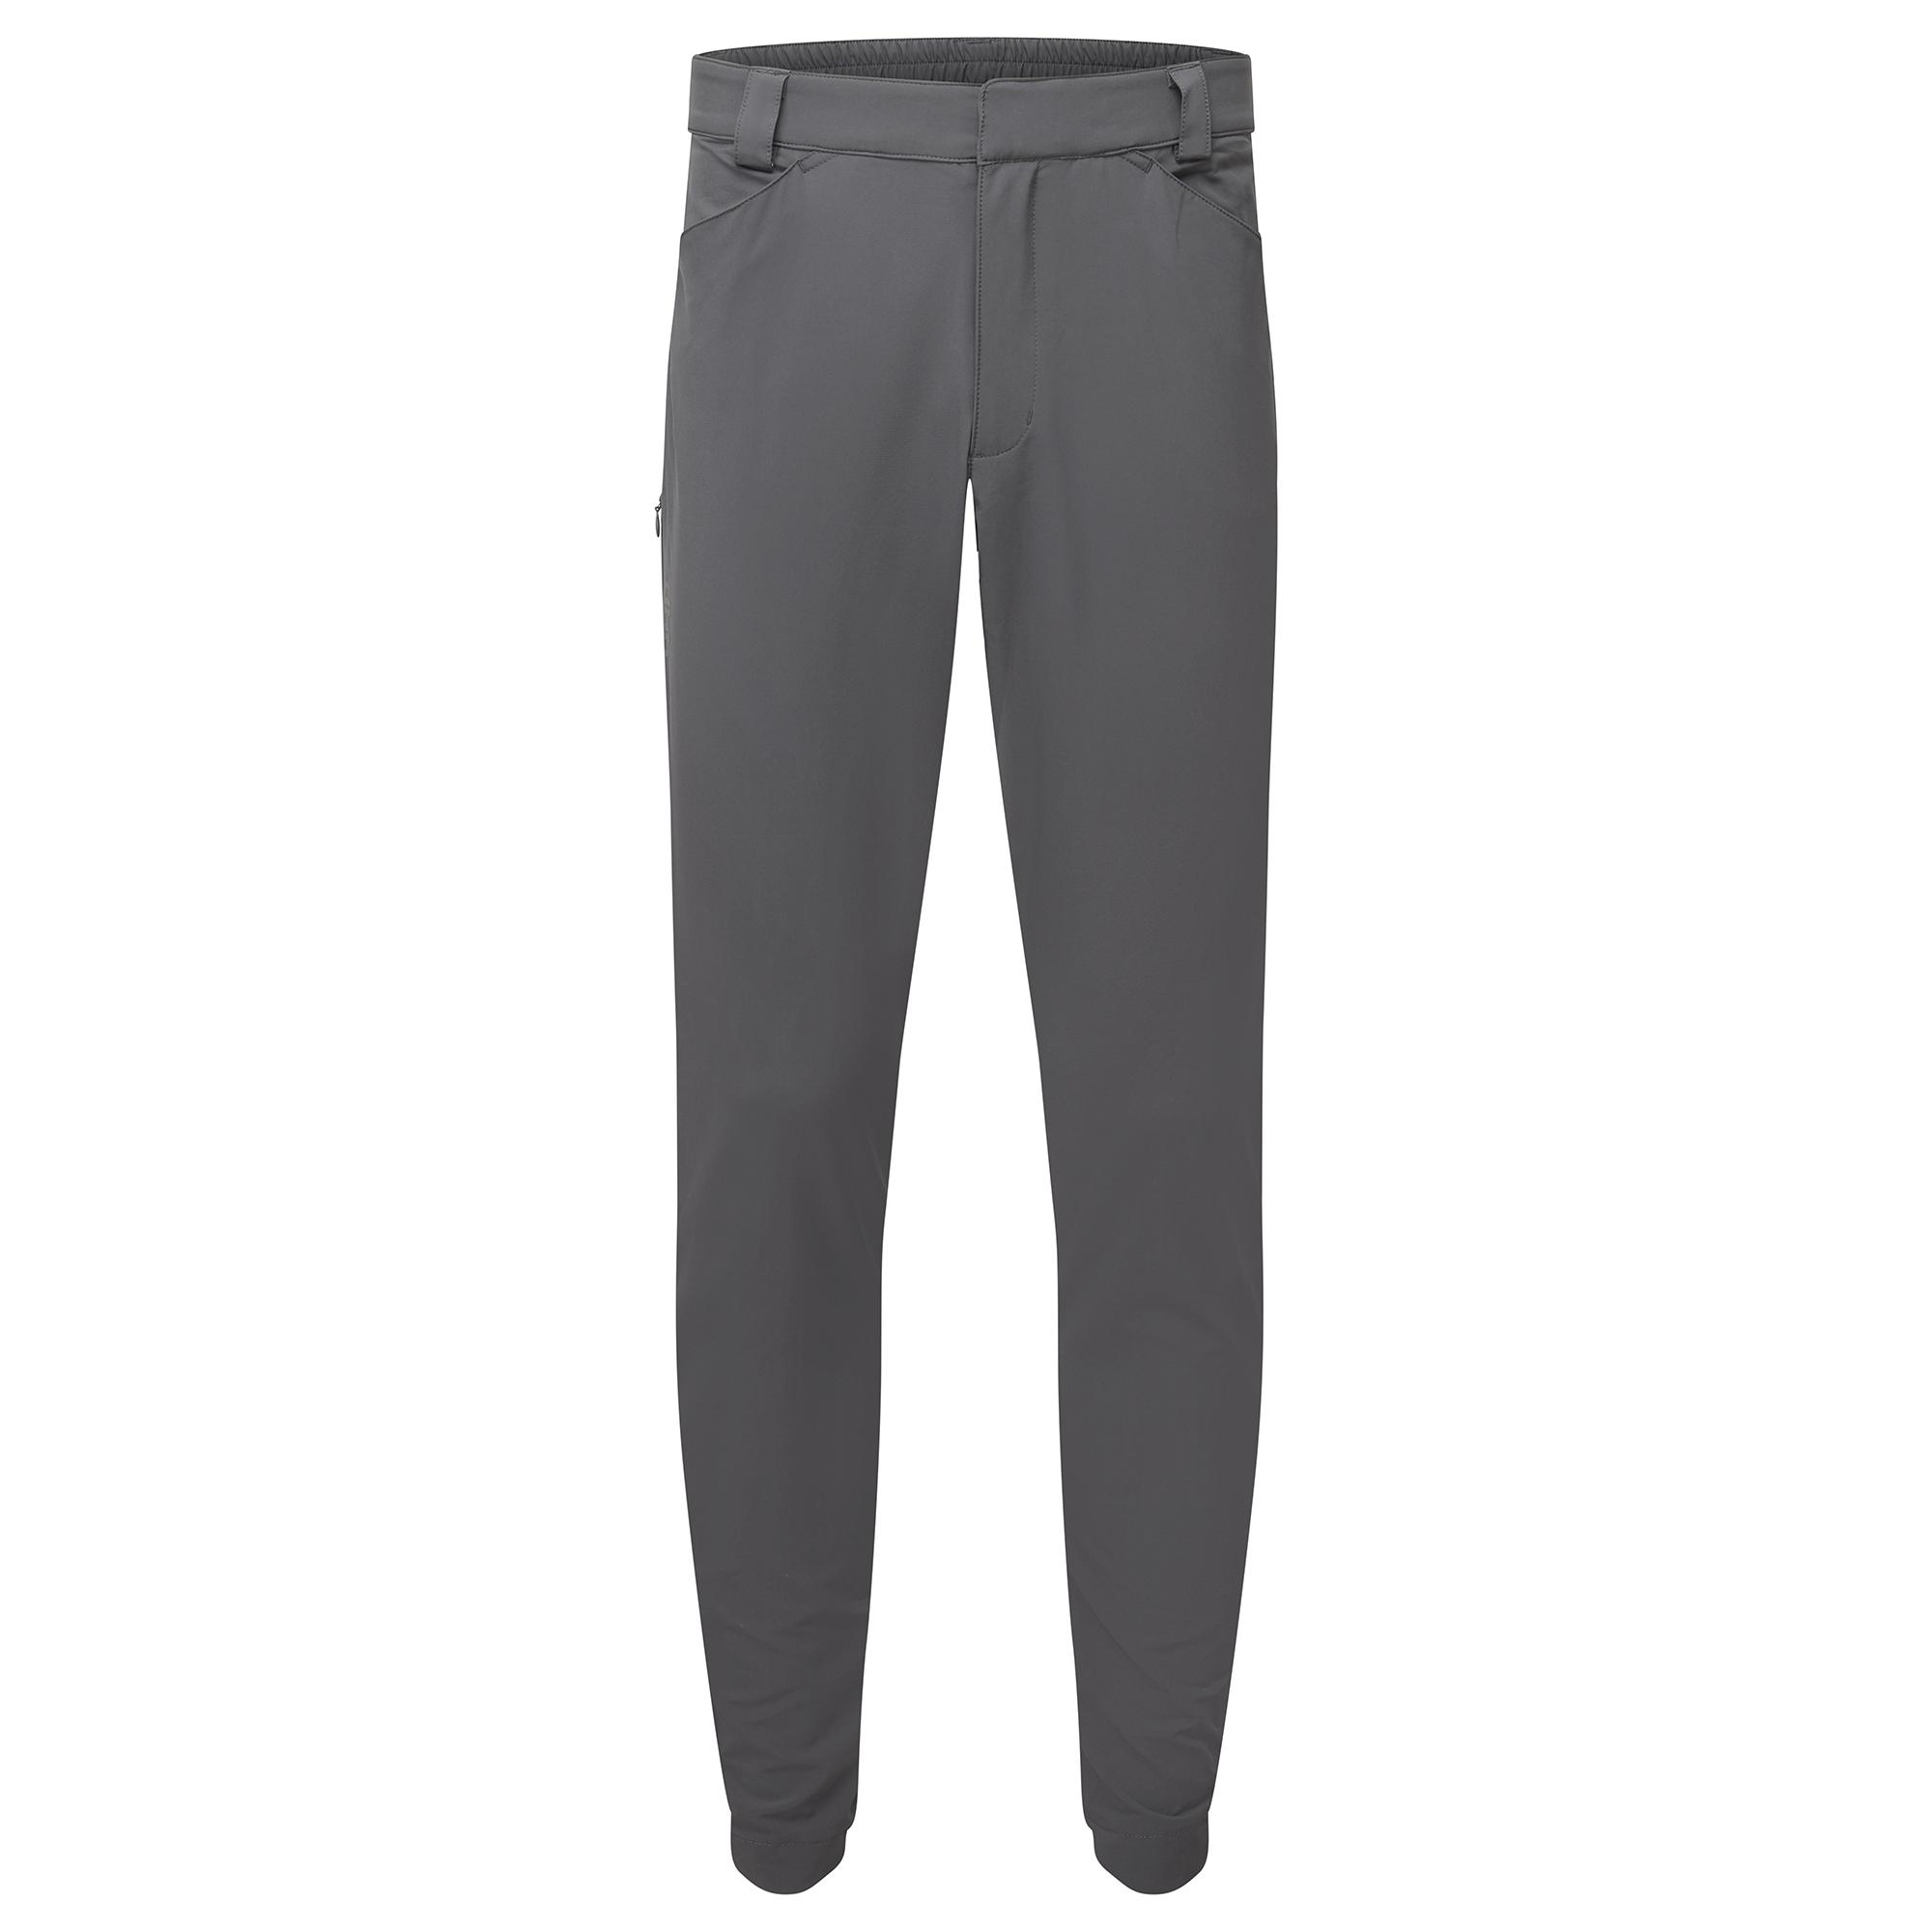 Dhb Trail Trousers - Forged Iron